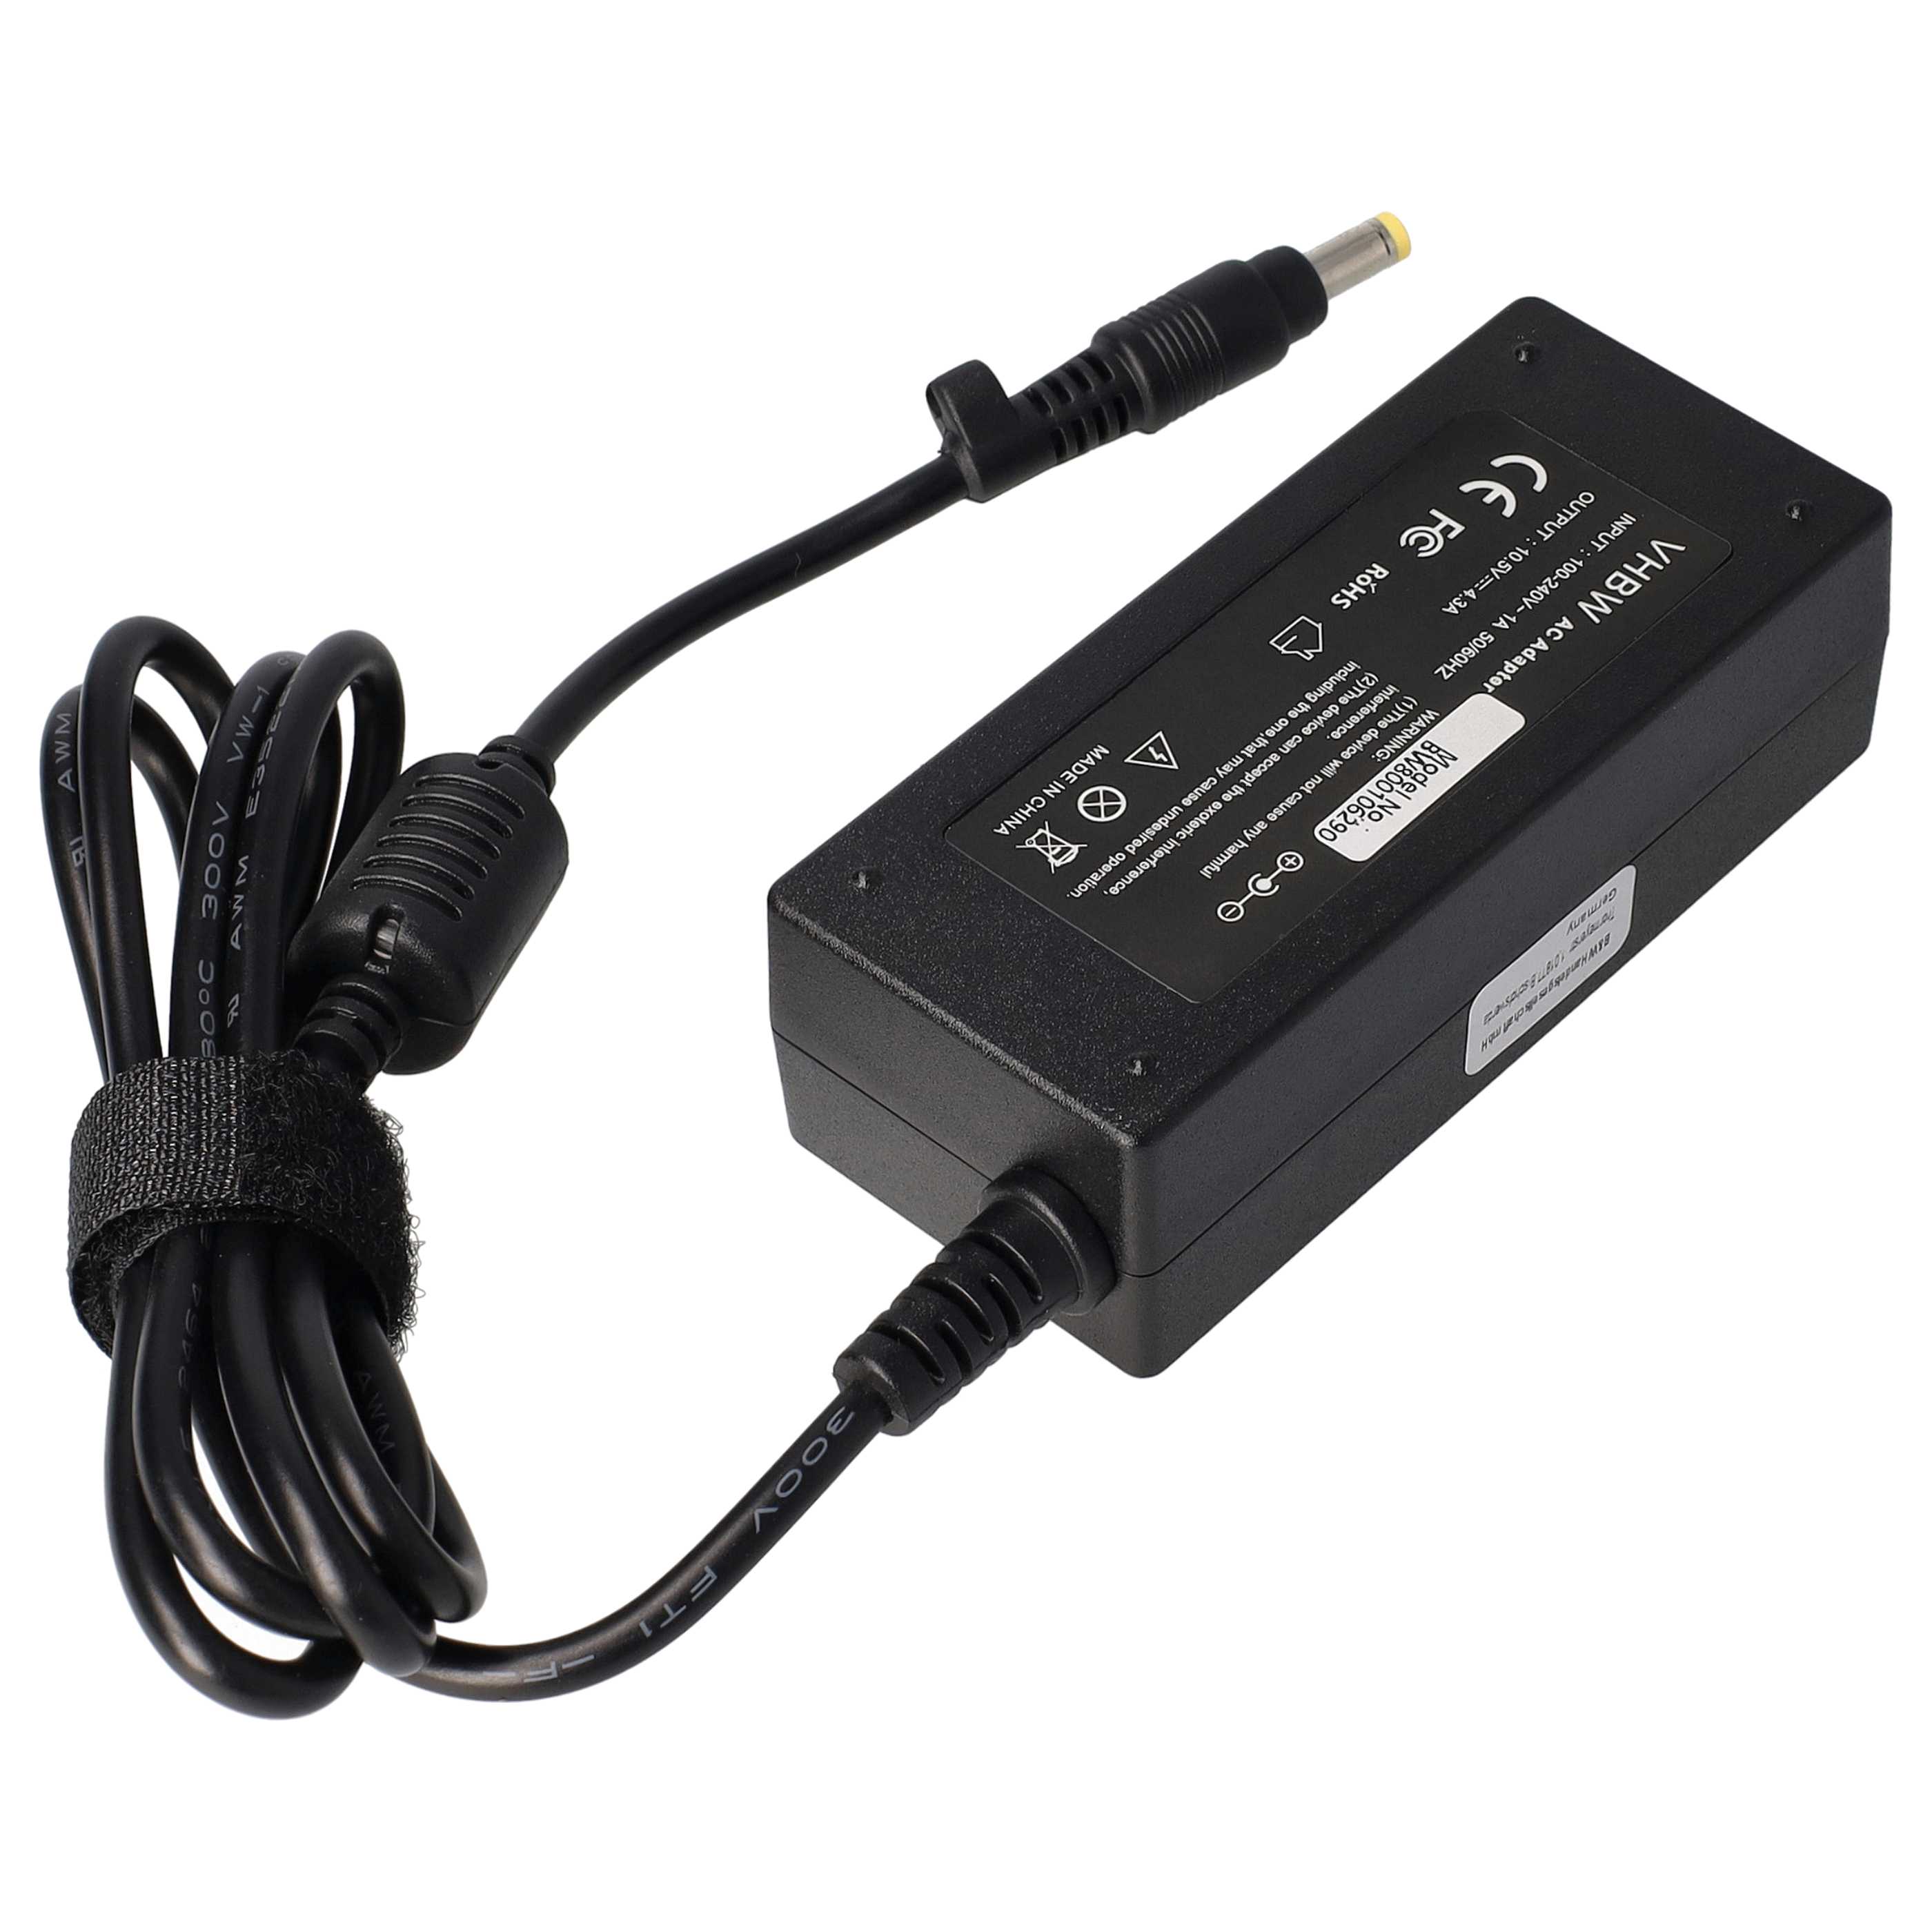 Mains Power Adapter replaces Sony ADP-30KH B for SonyNotebook, 45 W